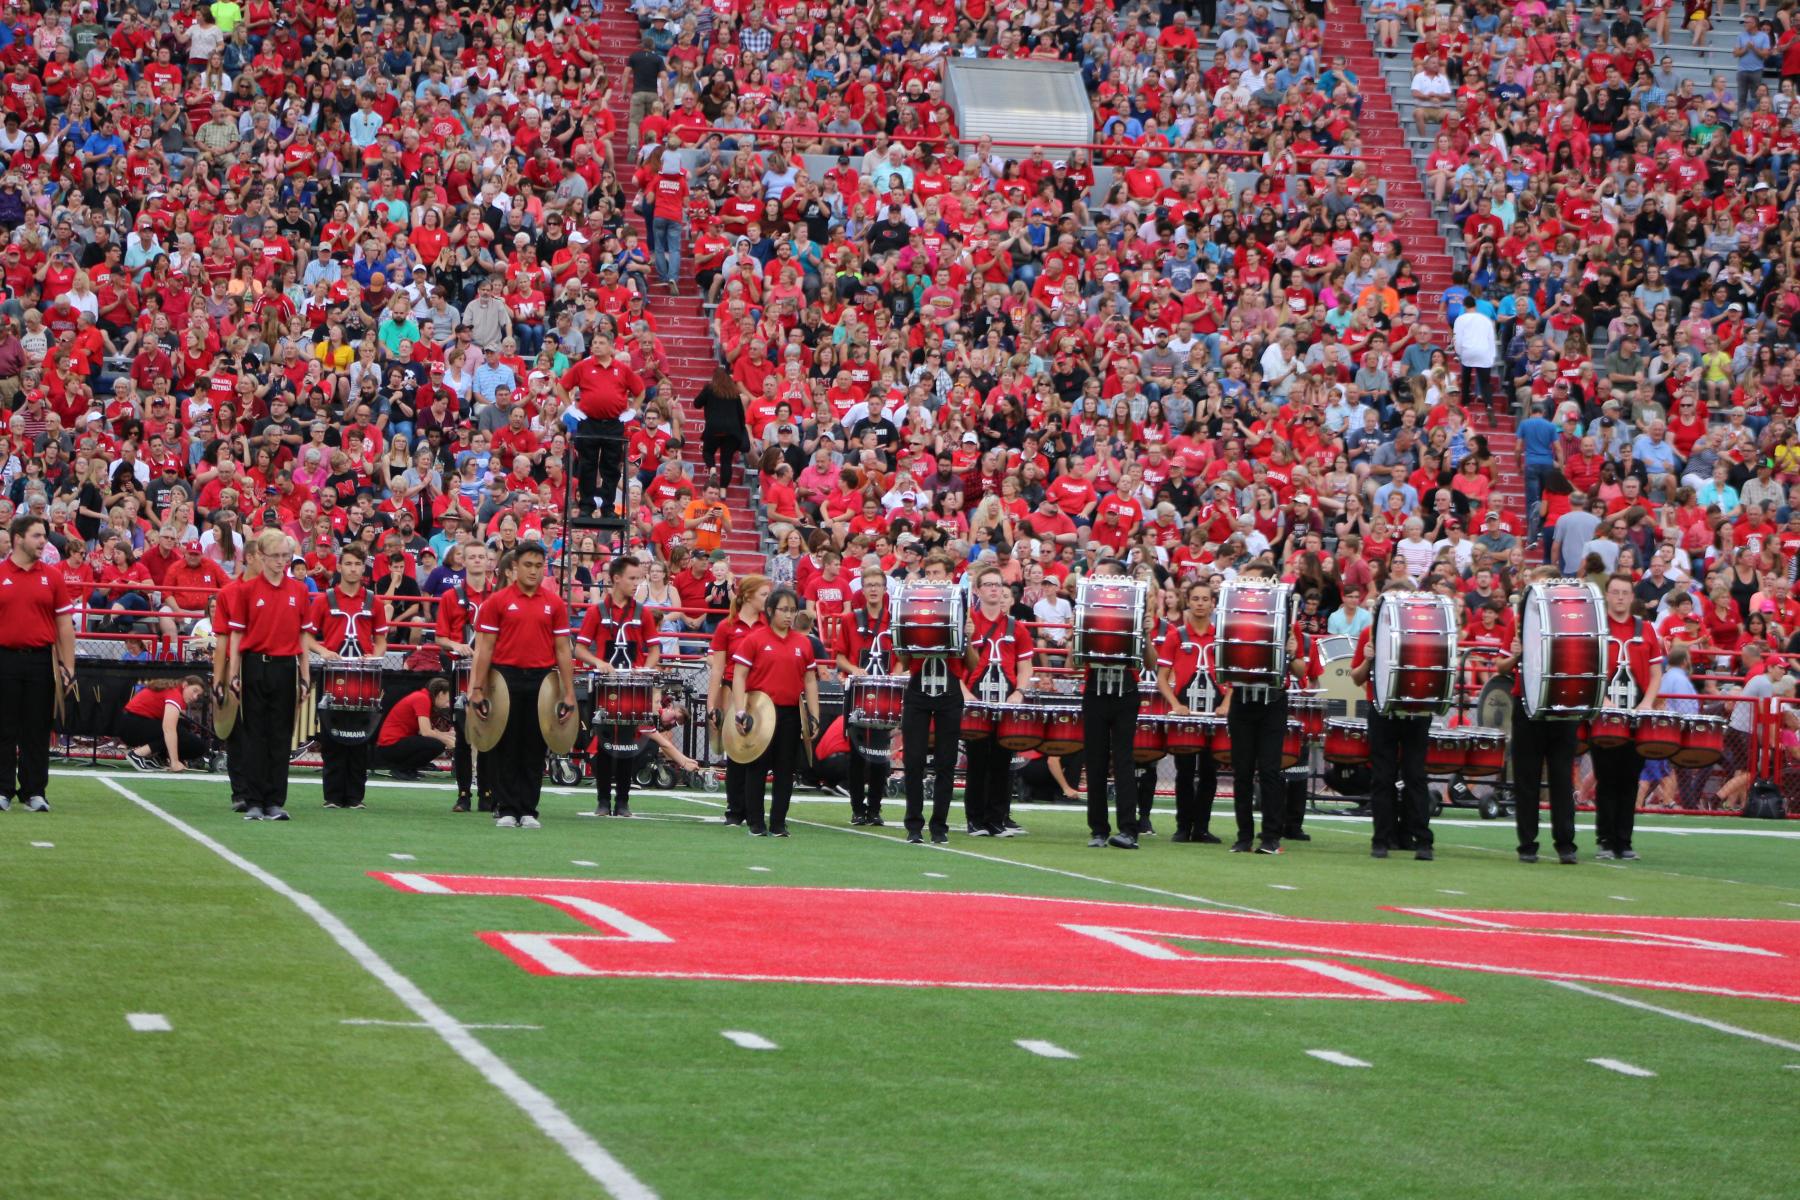 Cornhusker Marching Band Exhibition performance.